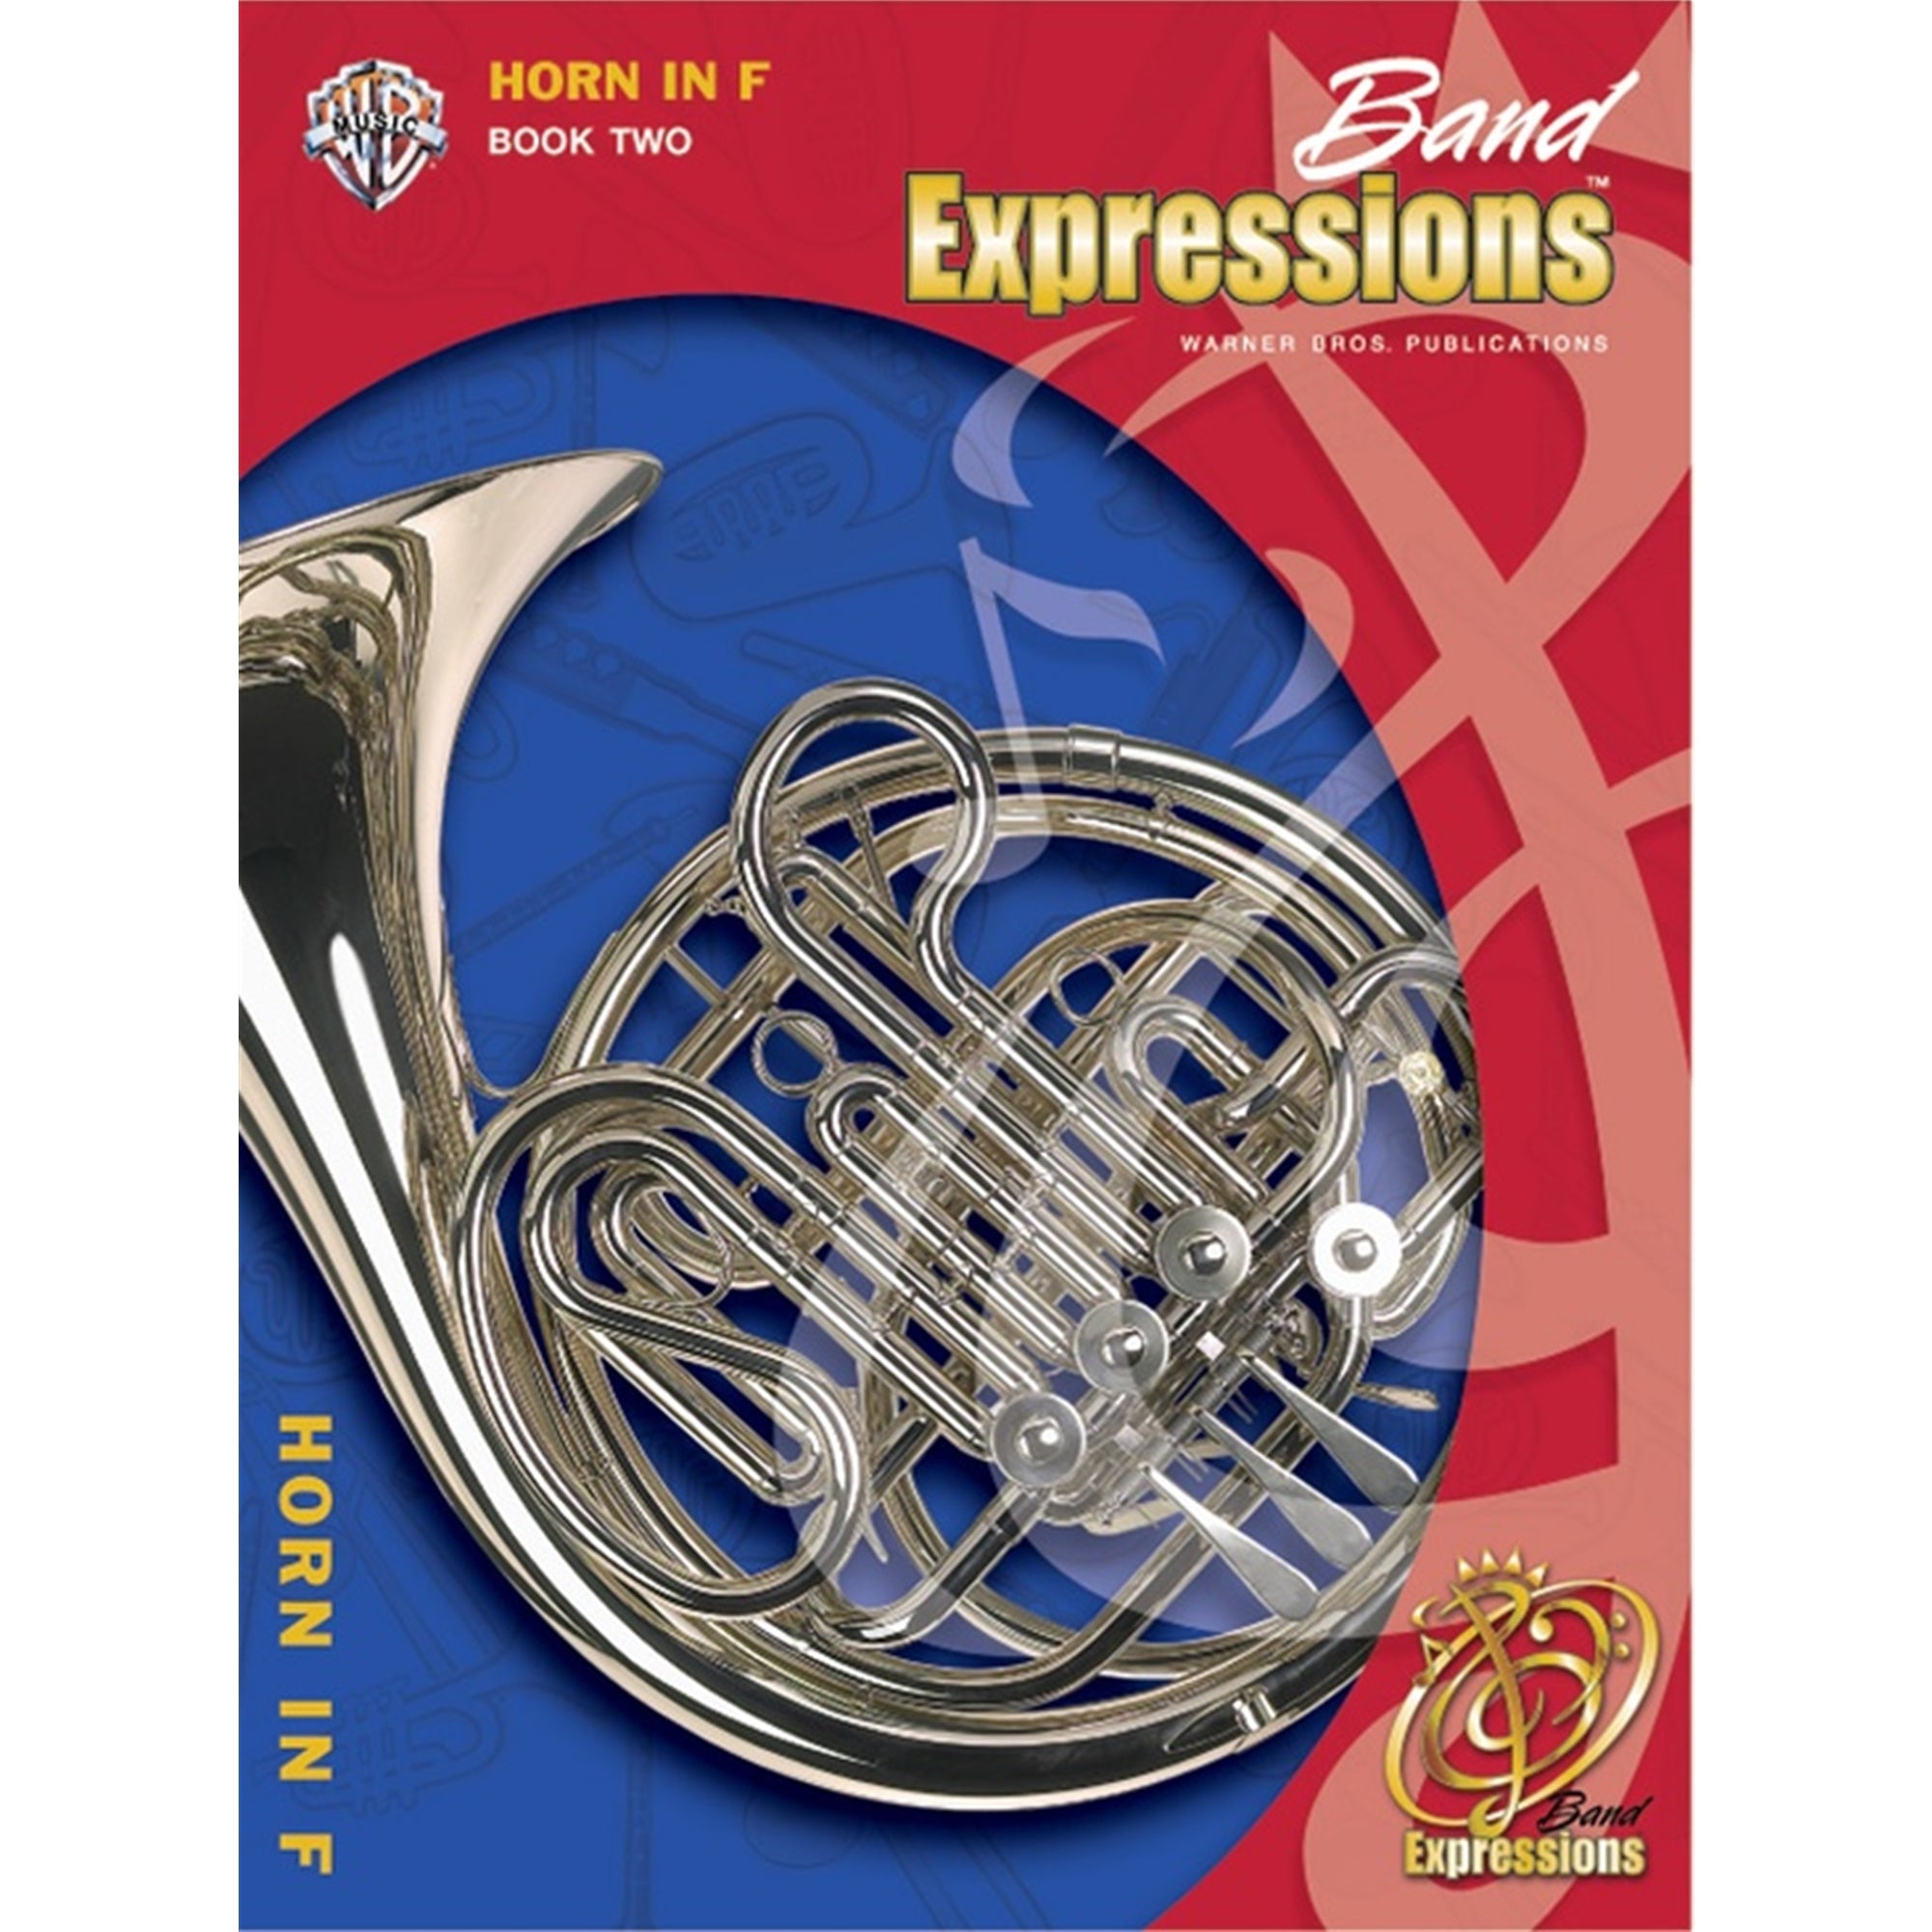 ALFRED 00EMCB2012CD Band Expressions , Book Two: Student Edition [Horn in F]